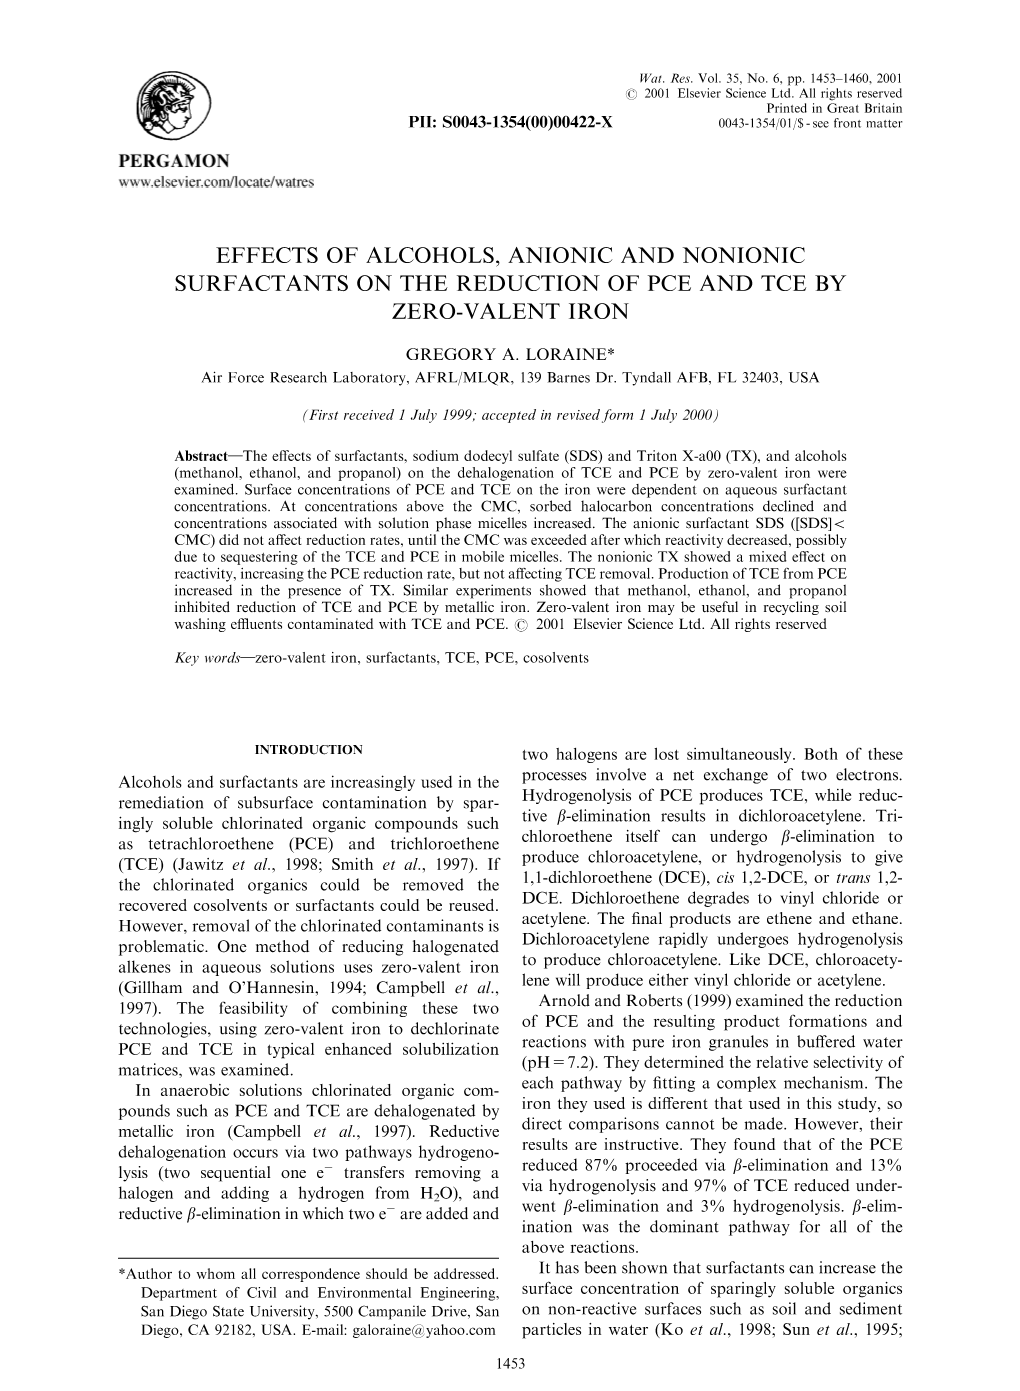 Effects of Alcohols, Anionic and Nonionic Surfactants on the Reduction of Pce and Tce by Zero-Valent Iron